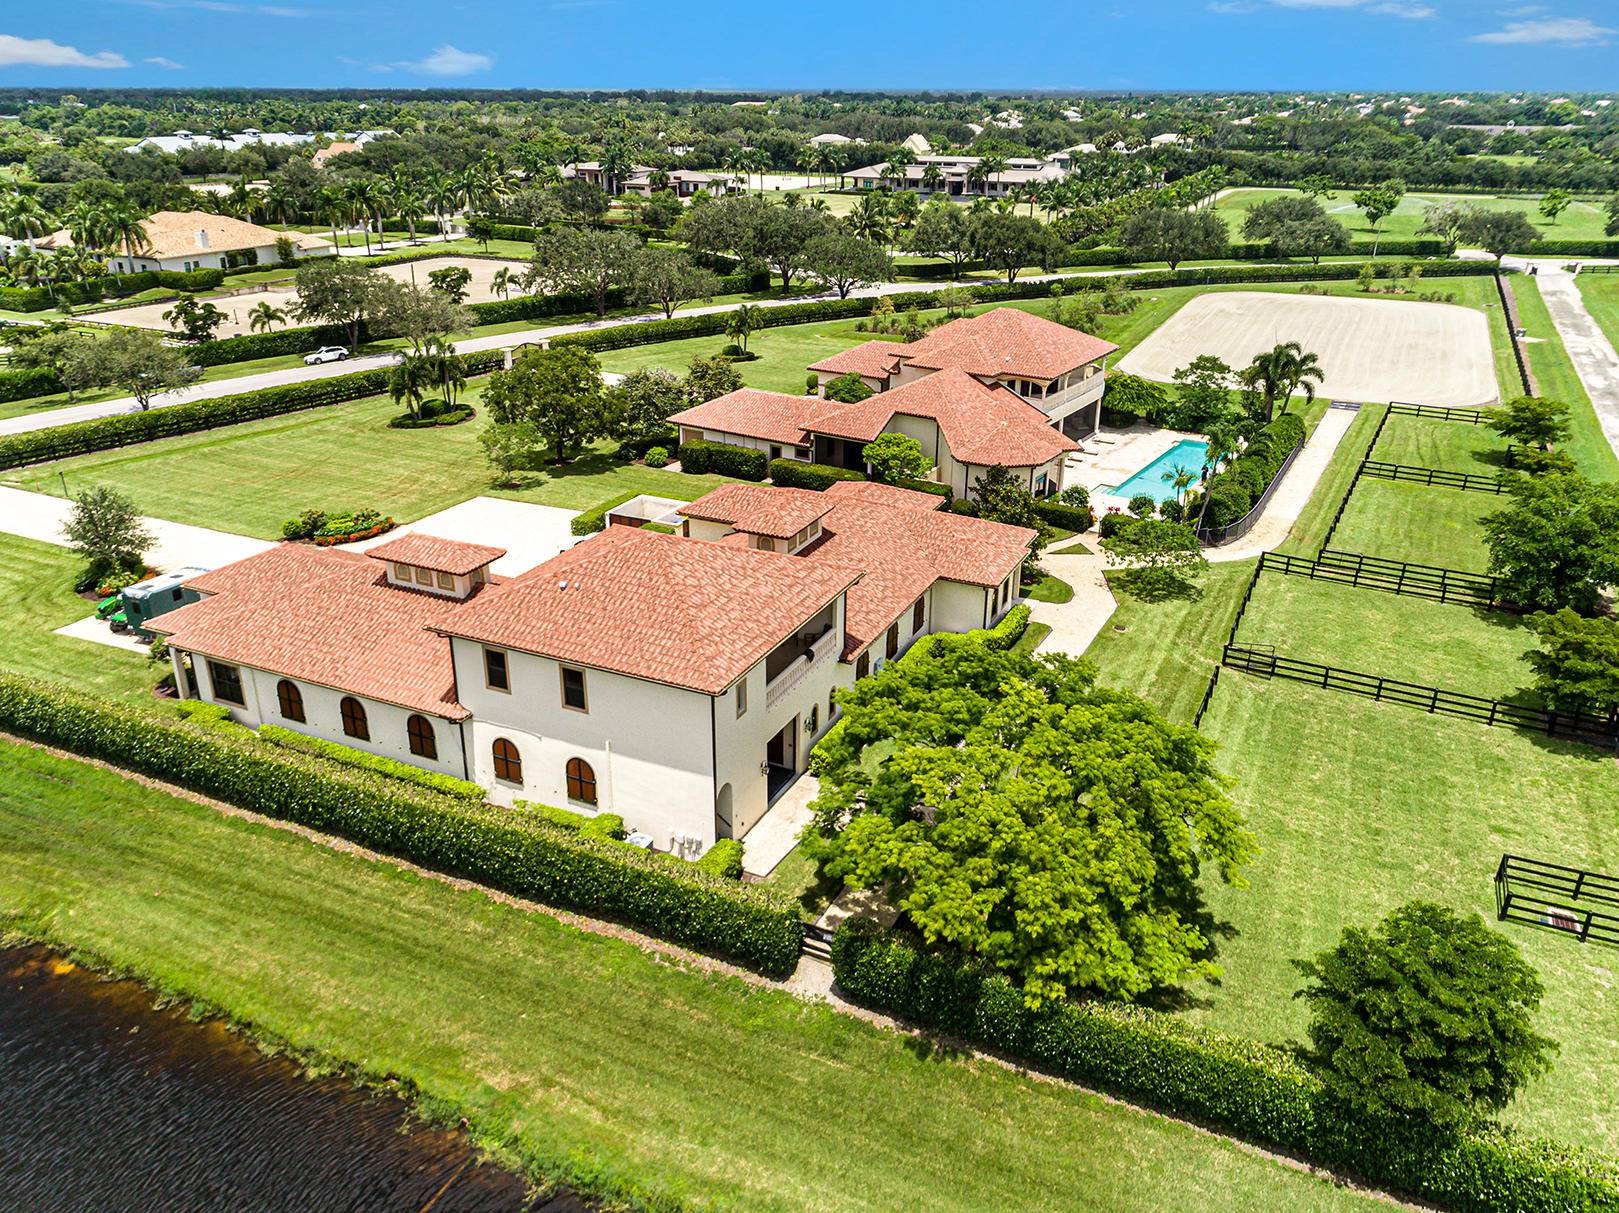 Incredible estate... everything you could want and more, only a short hack to the showgrounds.